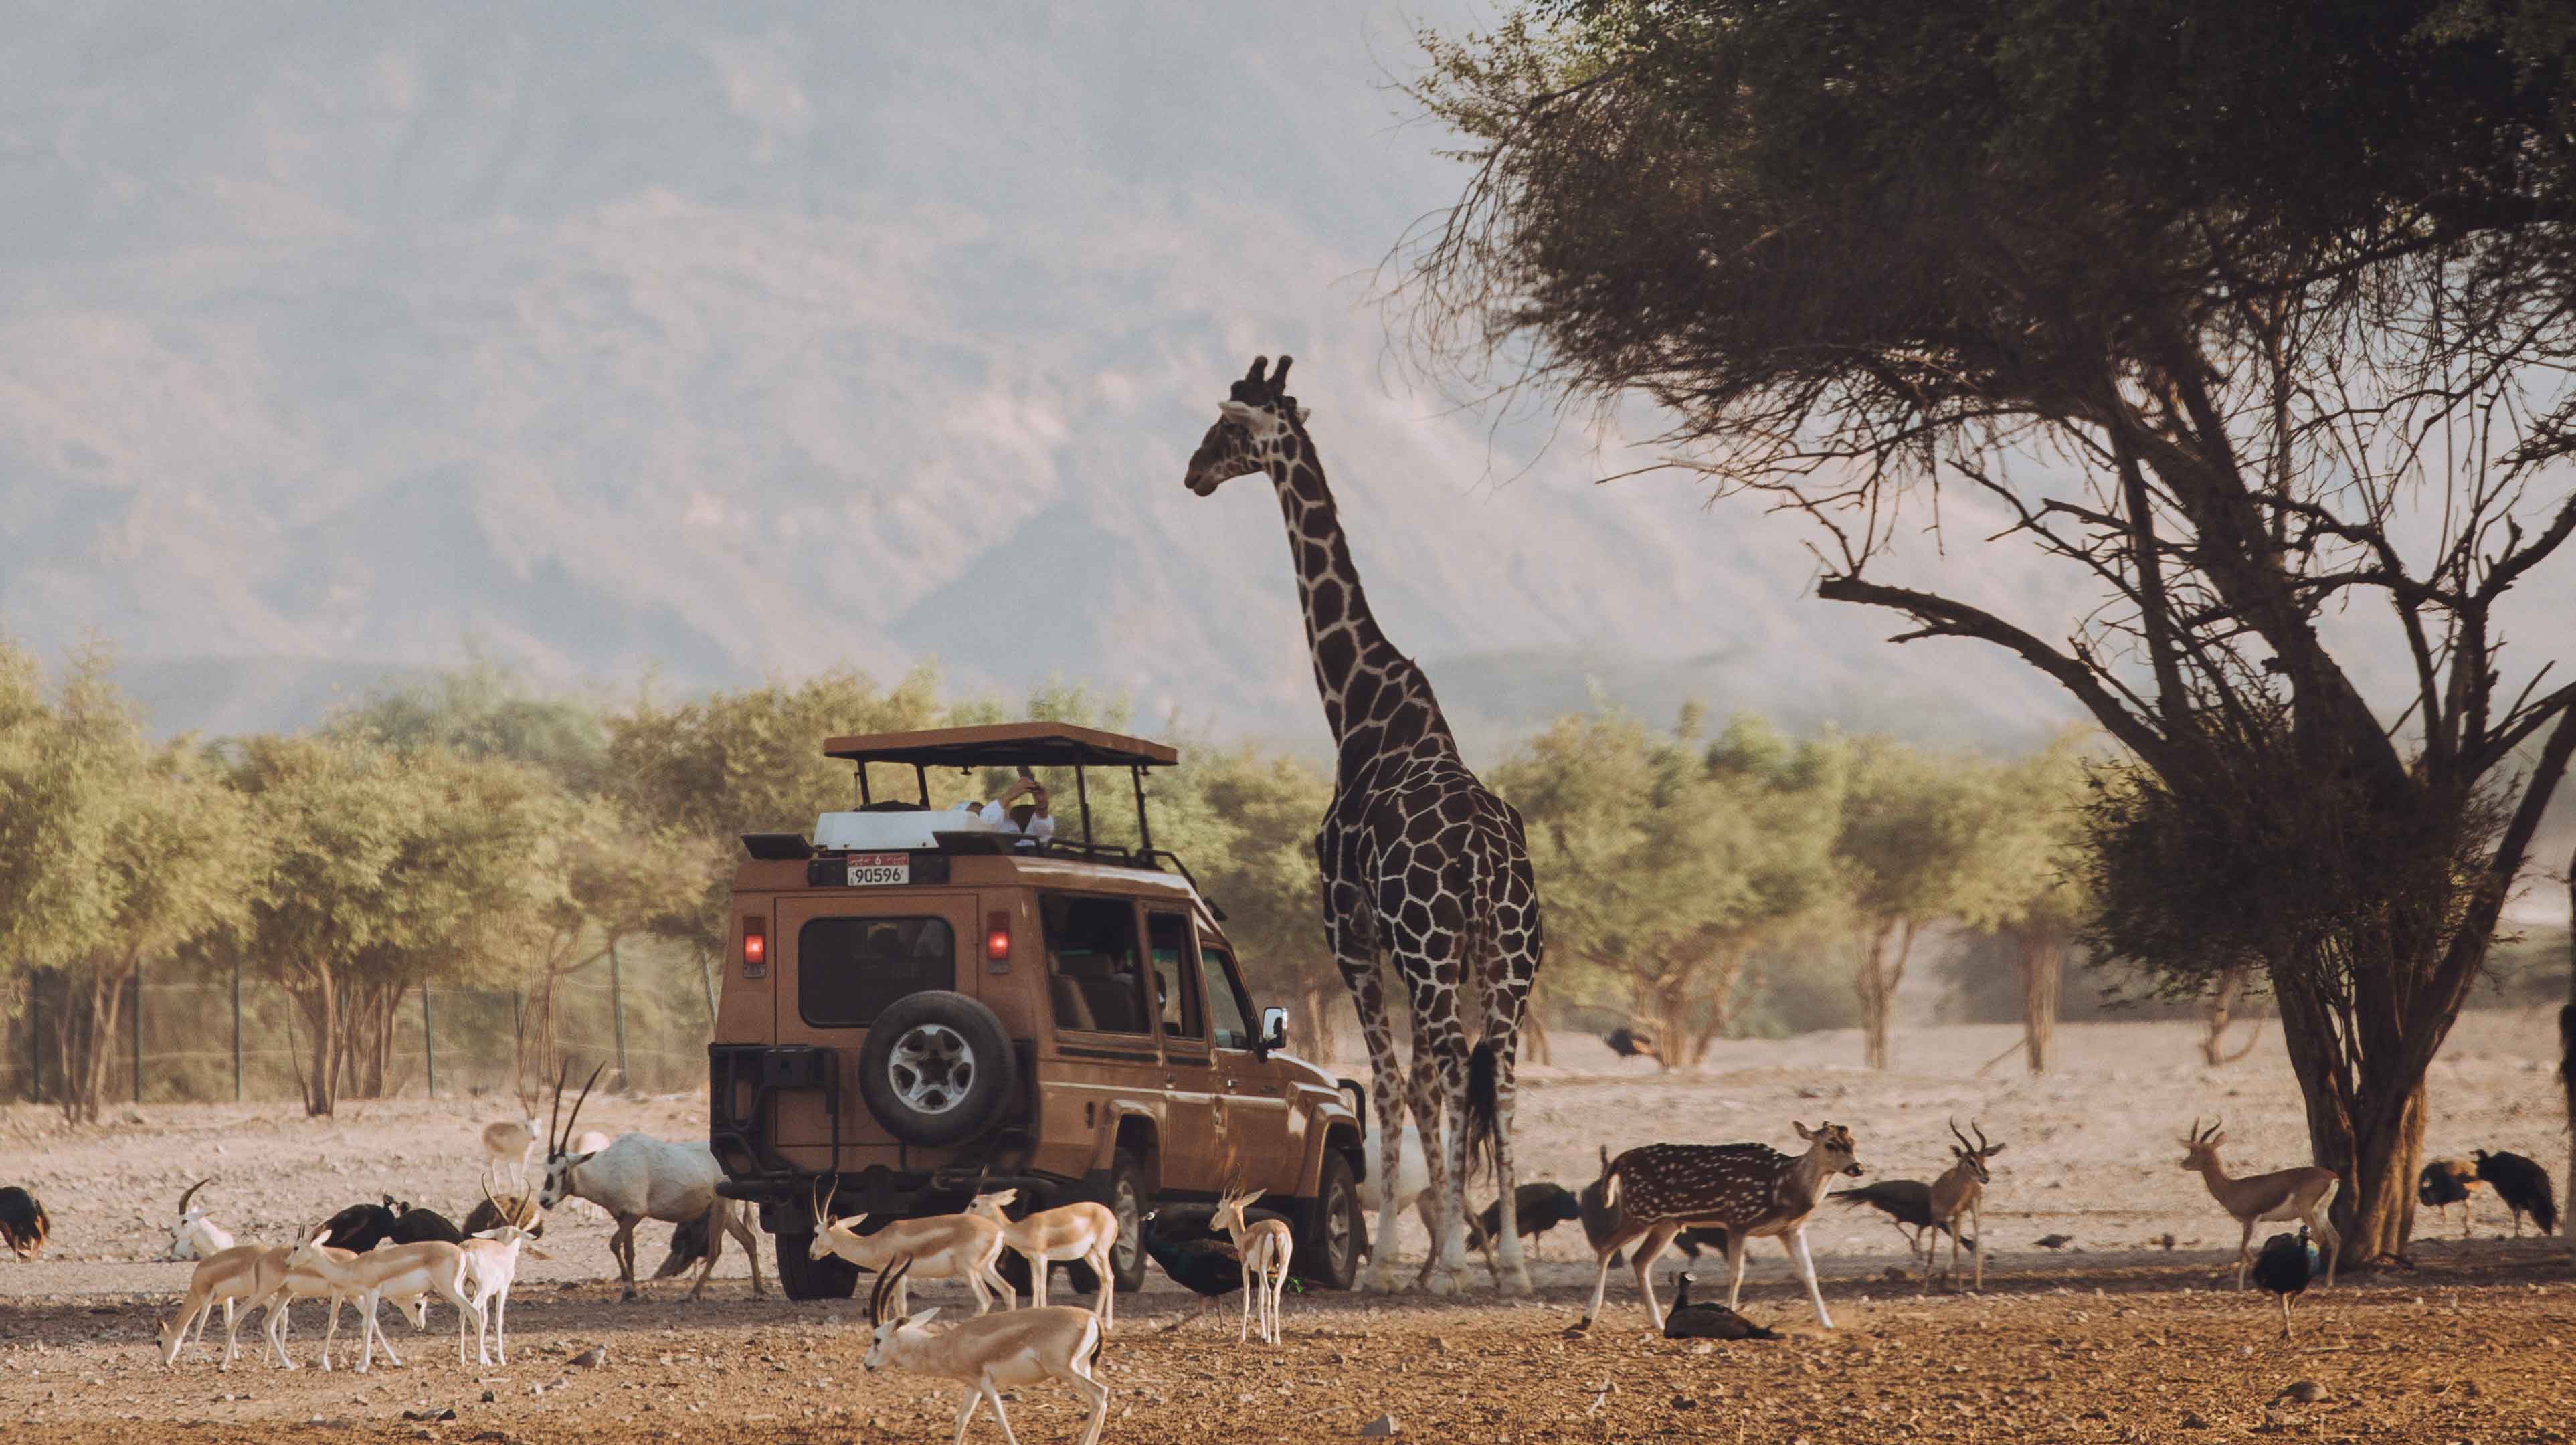 Giraffe and antelope beside a vehicle on the wild days and arabian nights tour